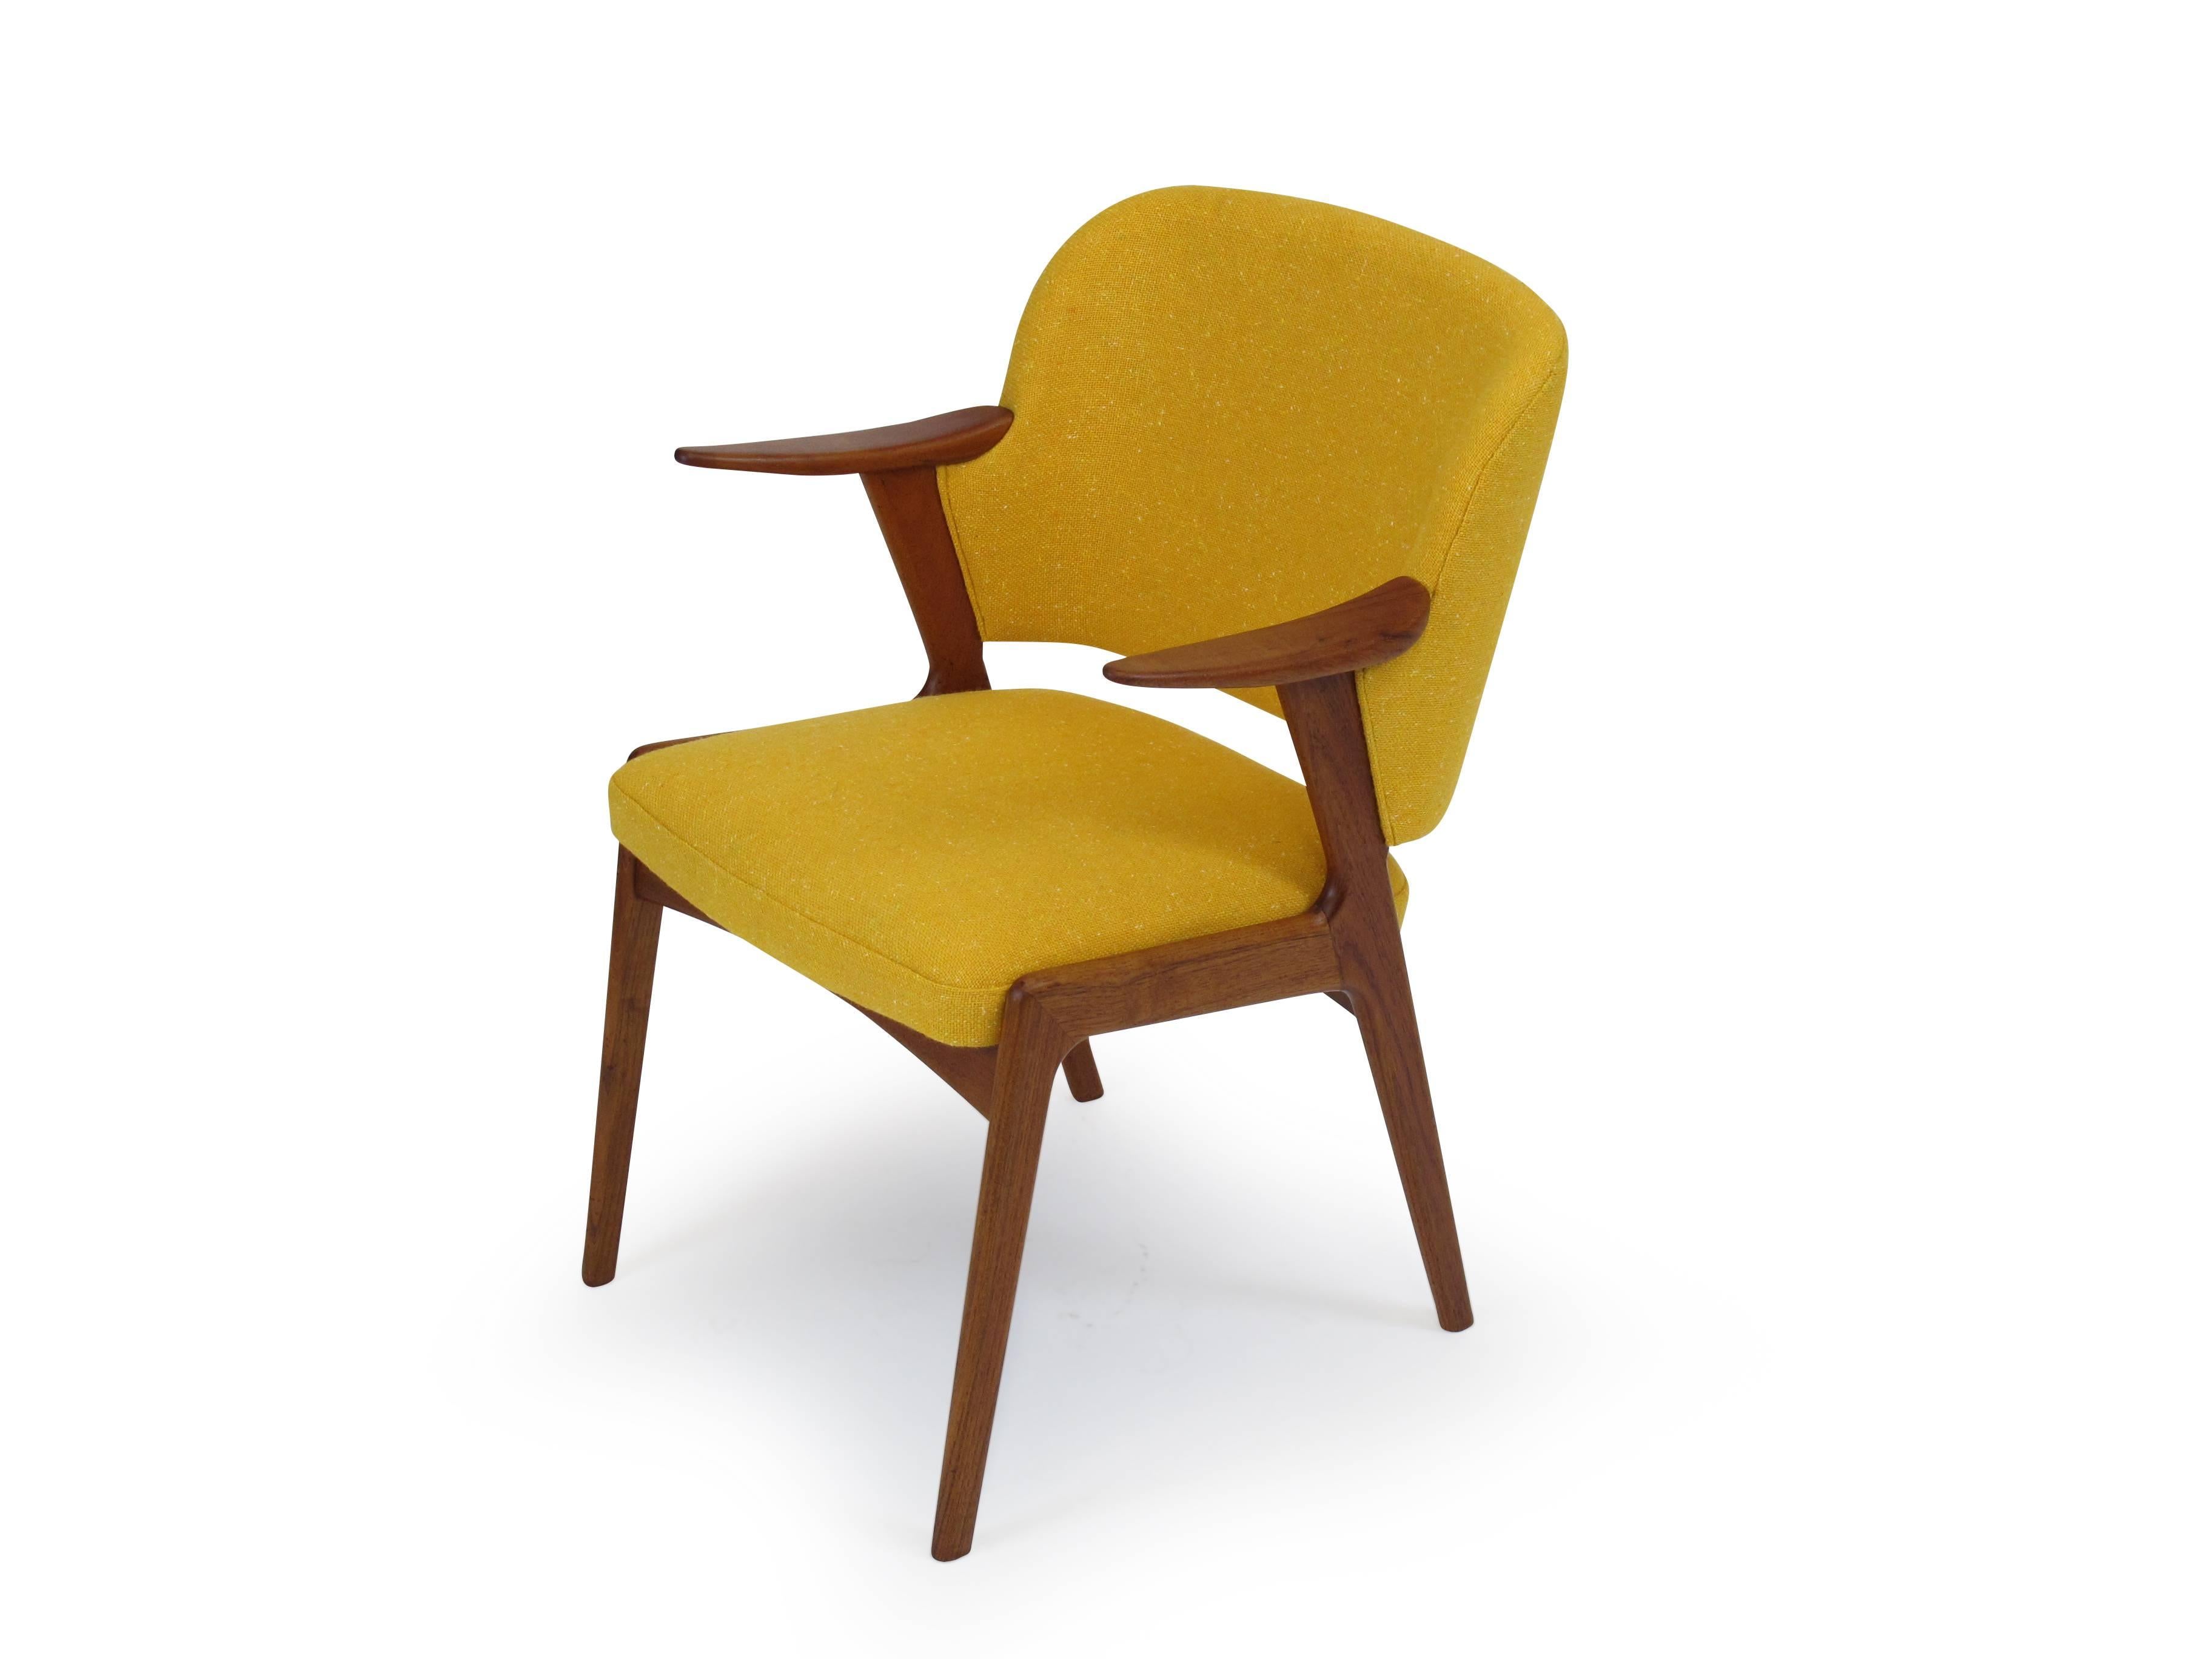 Finley restored midcentury Danish armchair in manner of Kurt Ostervig. Solid teak frame with an upholstered curved back with excellent back support and sculpted teak armrests; newly upholstered in a high-quality yellow wool textile. Fabric swatch